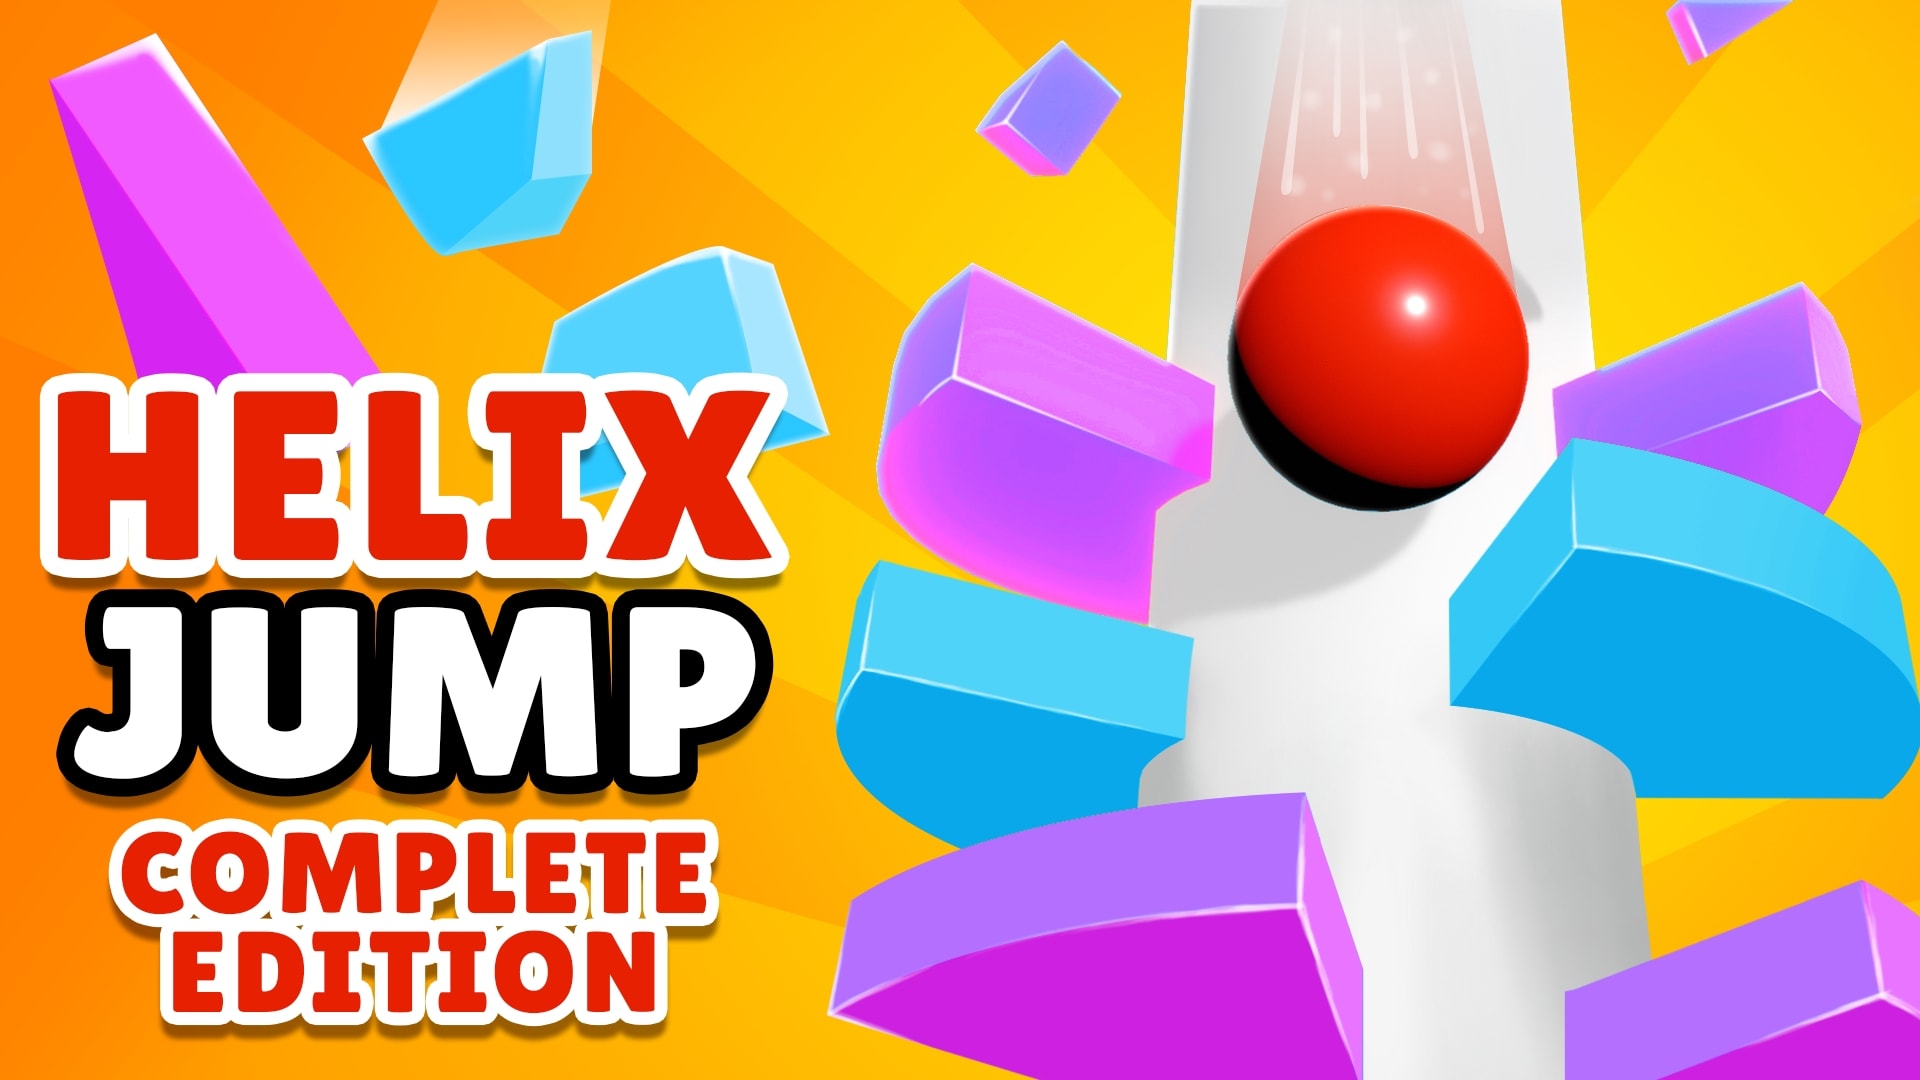 Helix Jump: Complete Edition 1